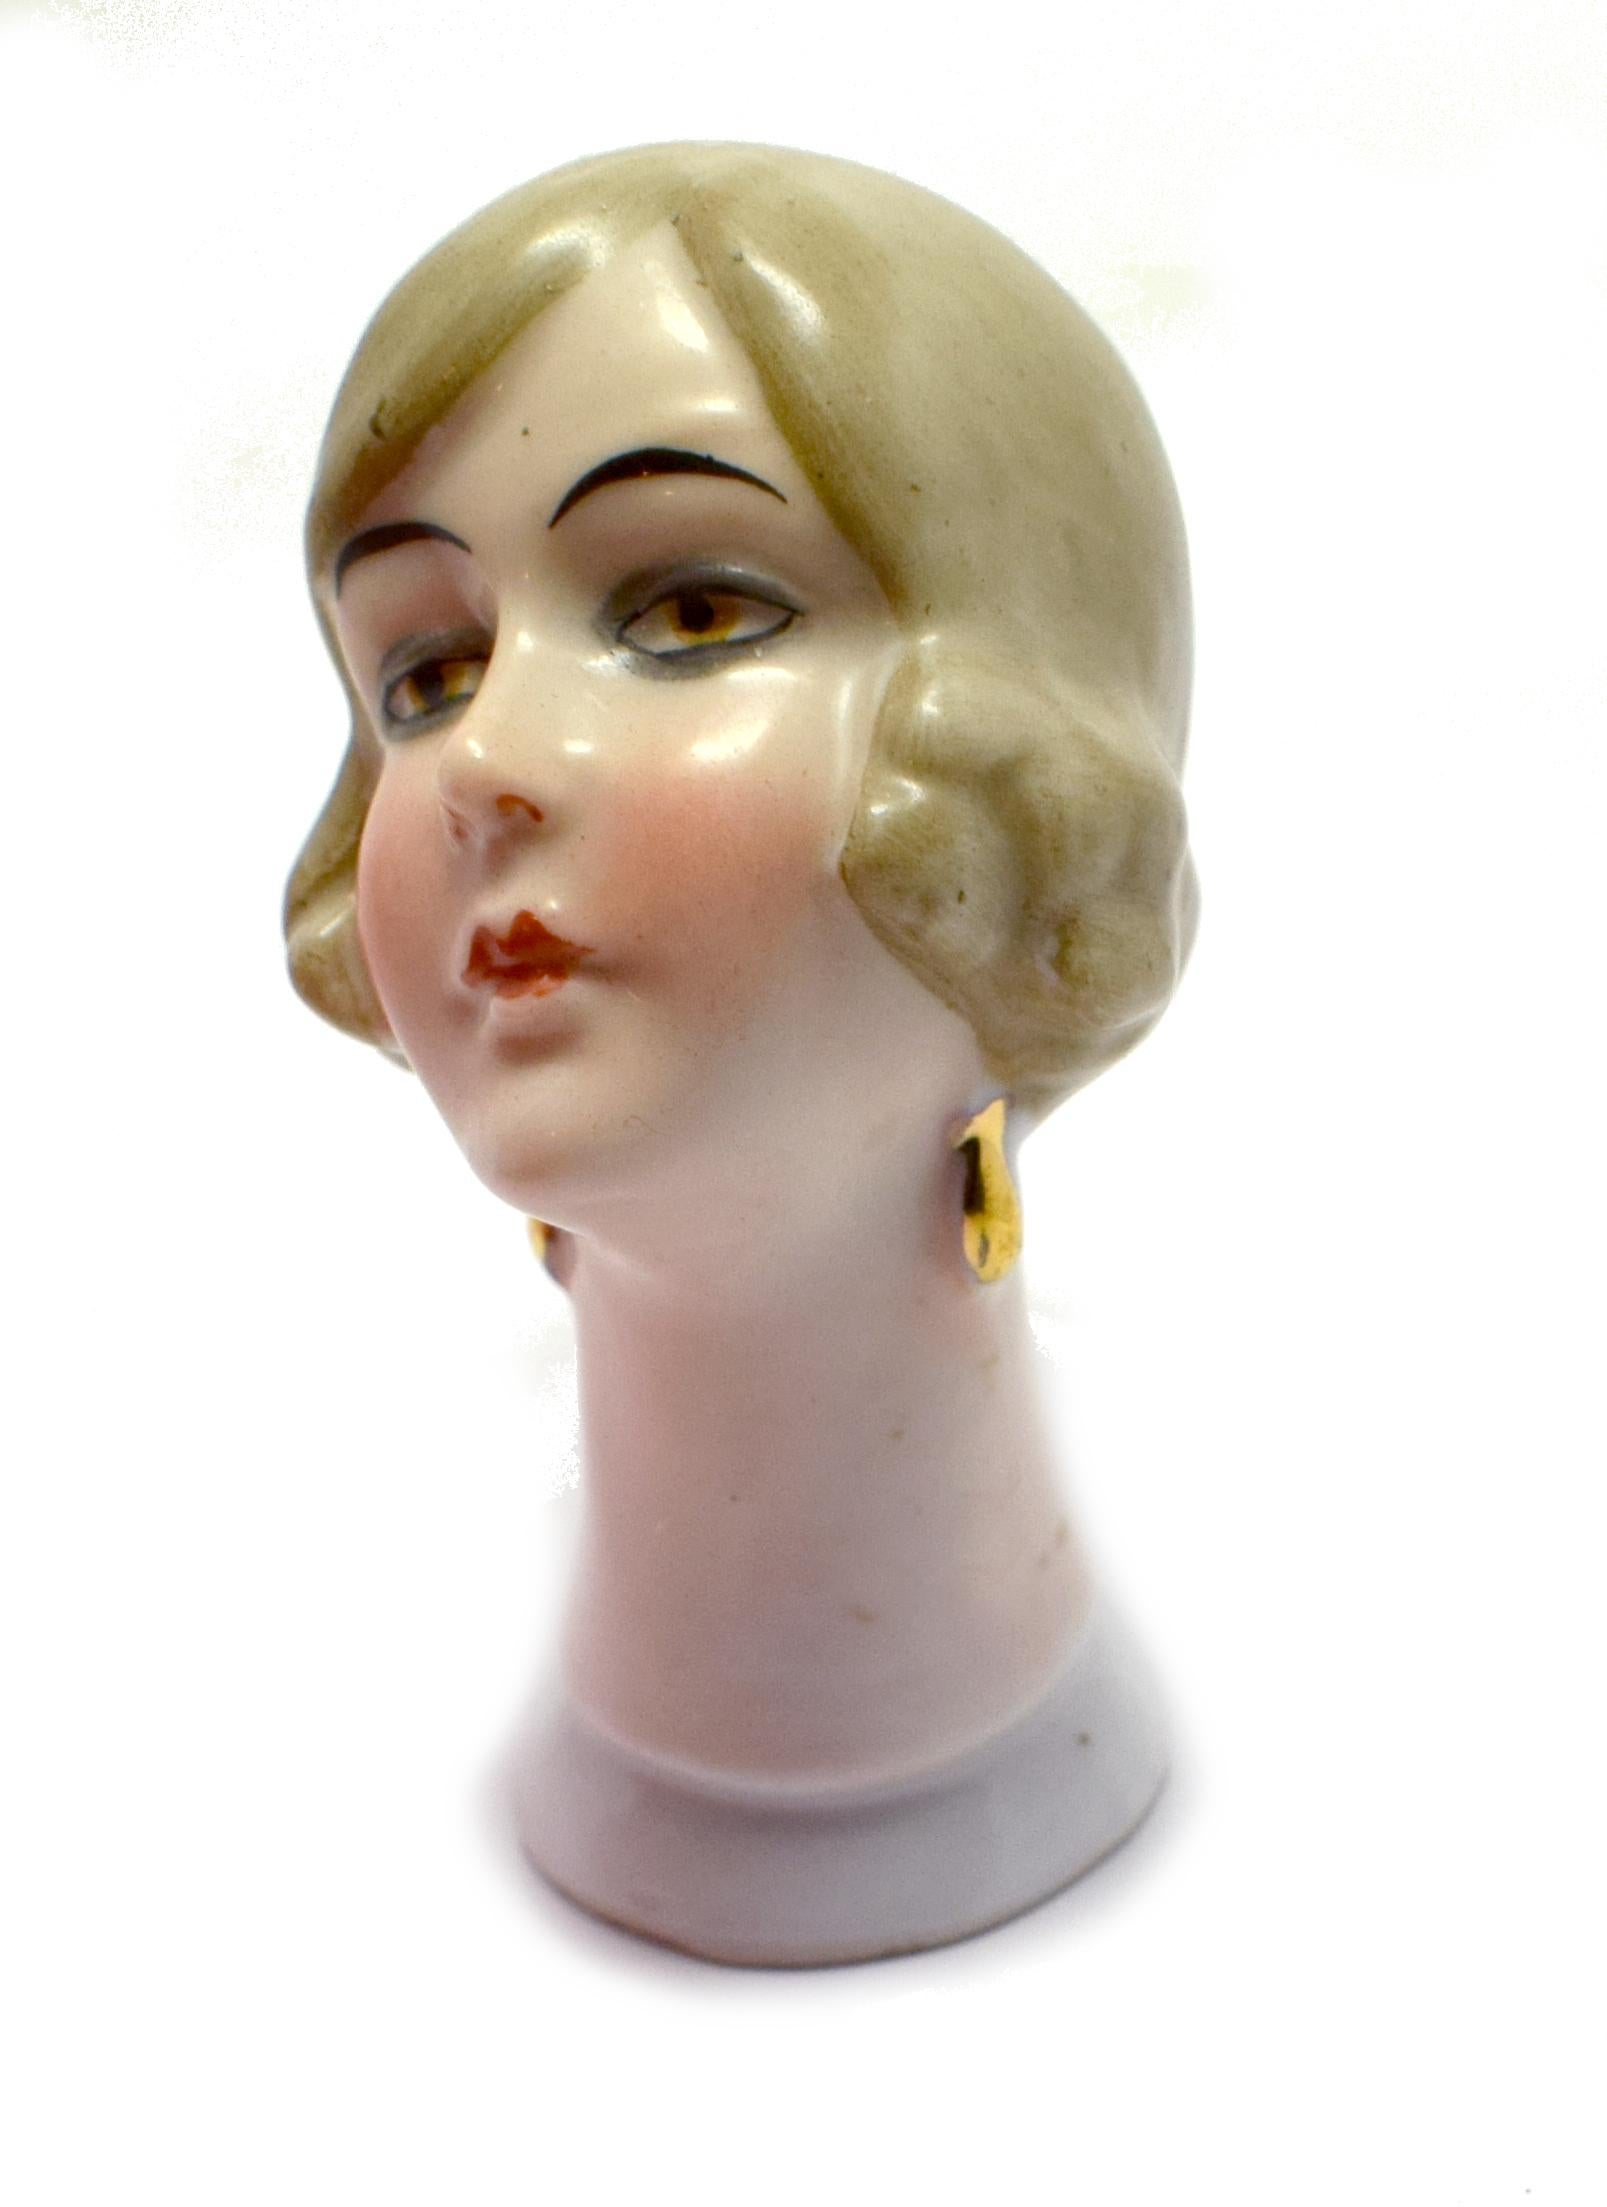 Art Deco Pin Cushion Doll by Fasold & Stuach In Good Condition For Sale In Devon, England